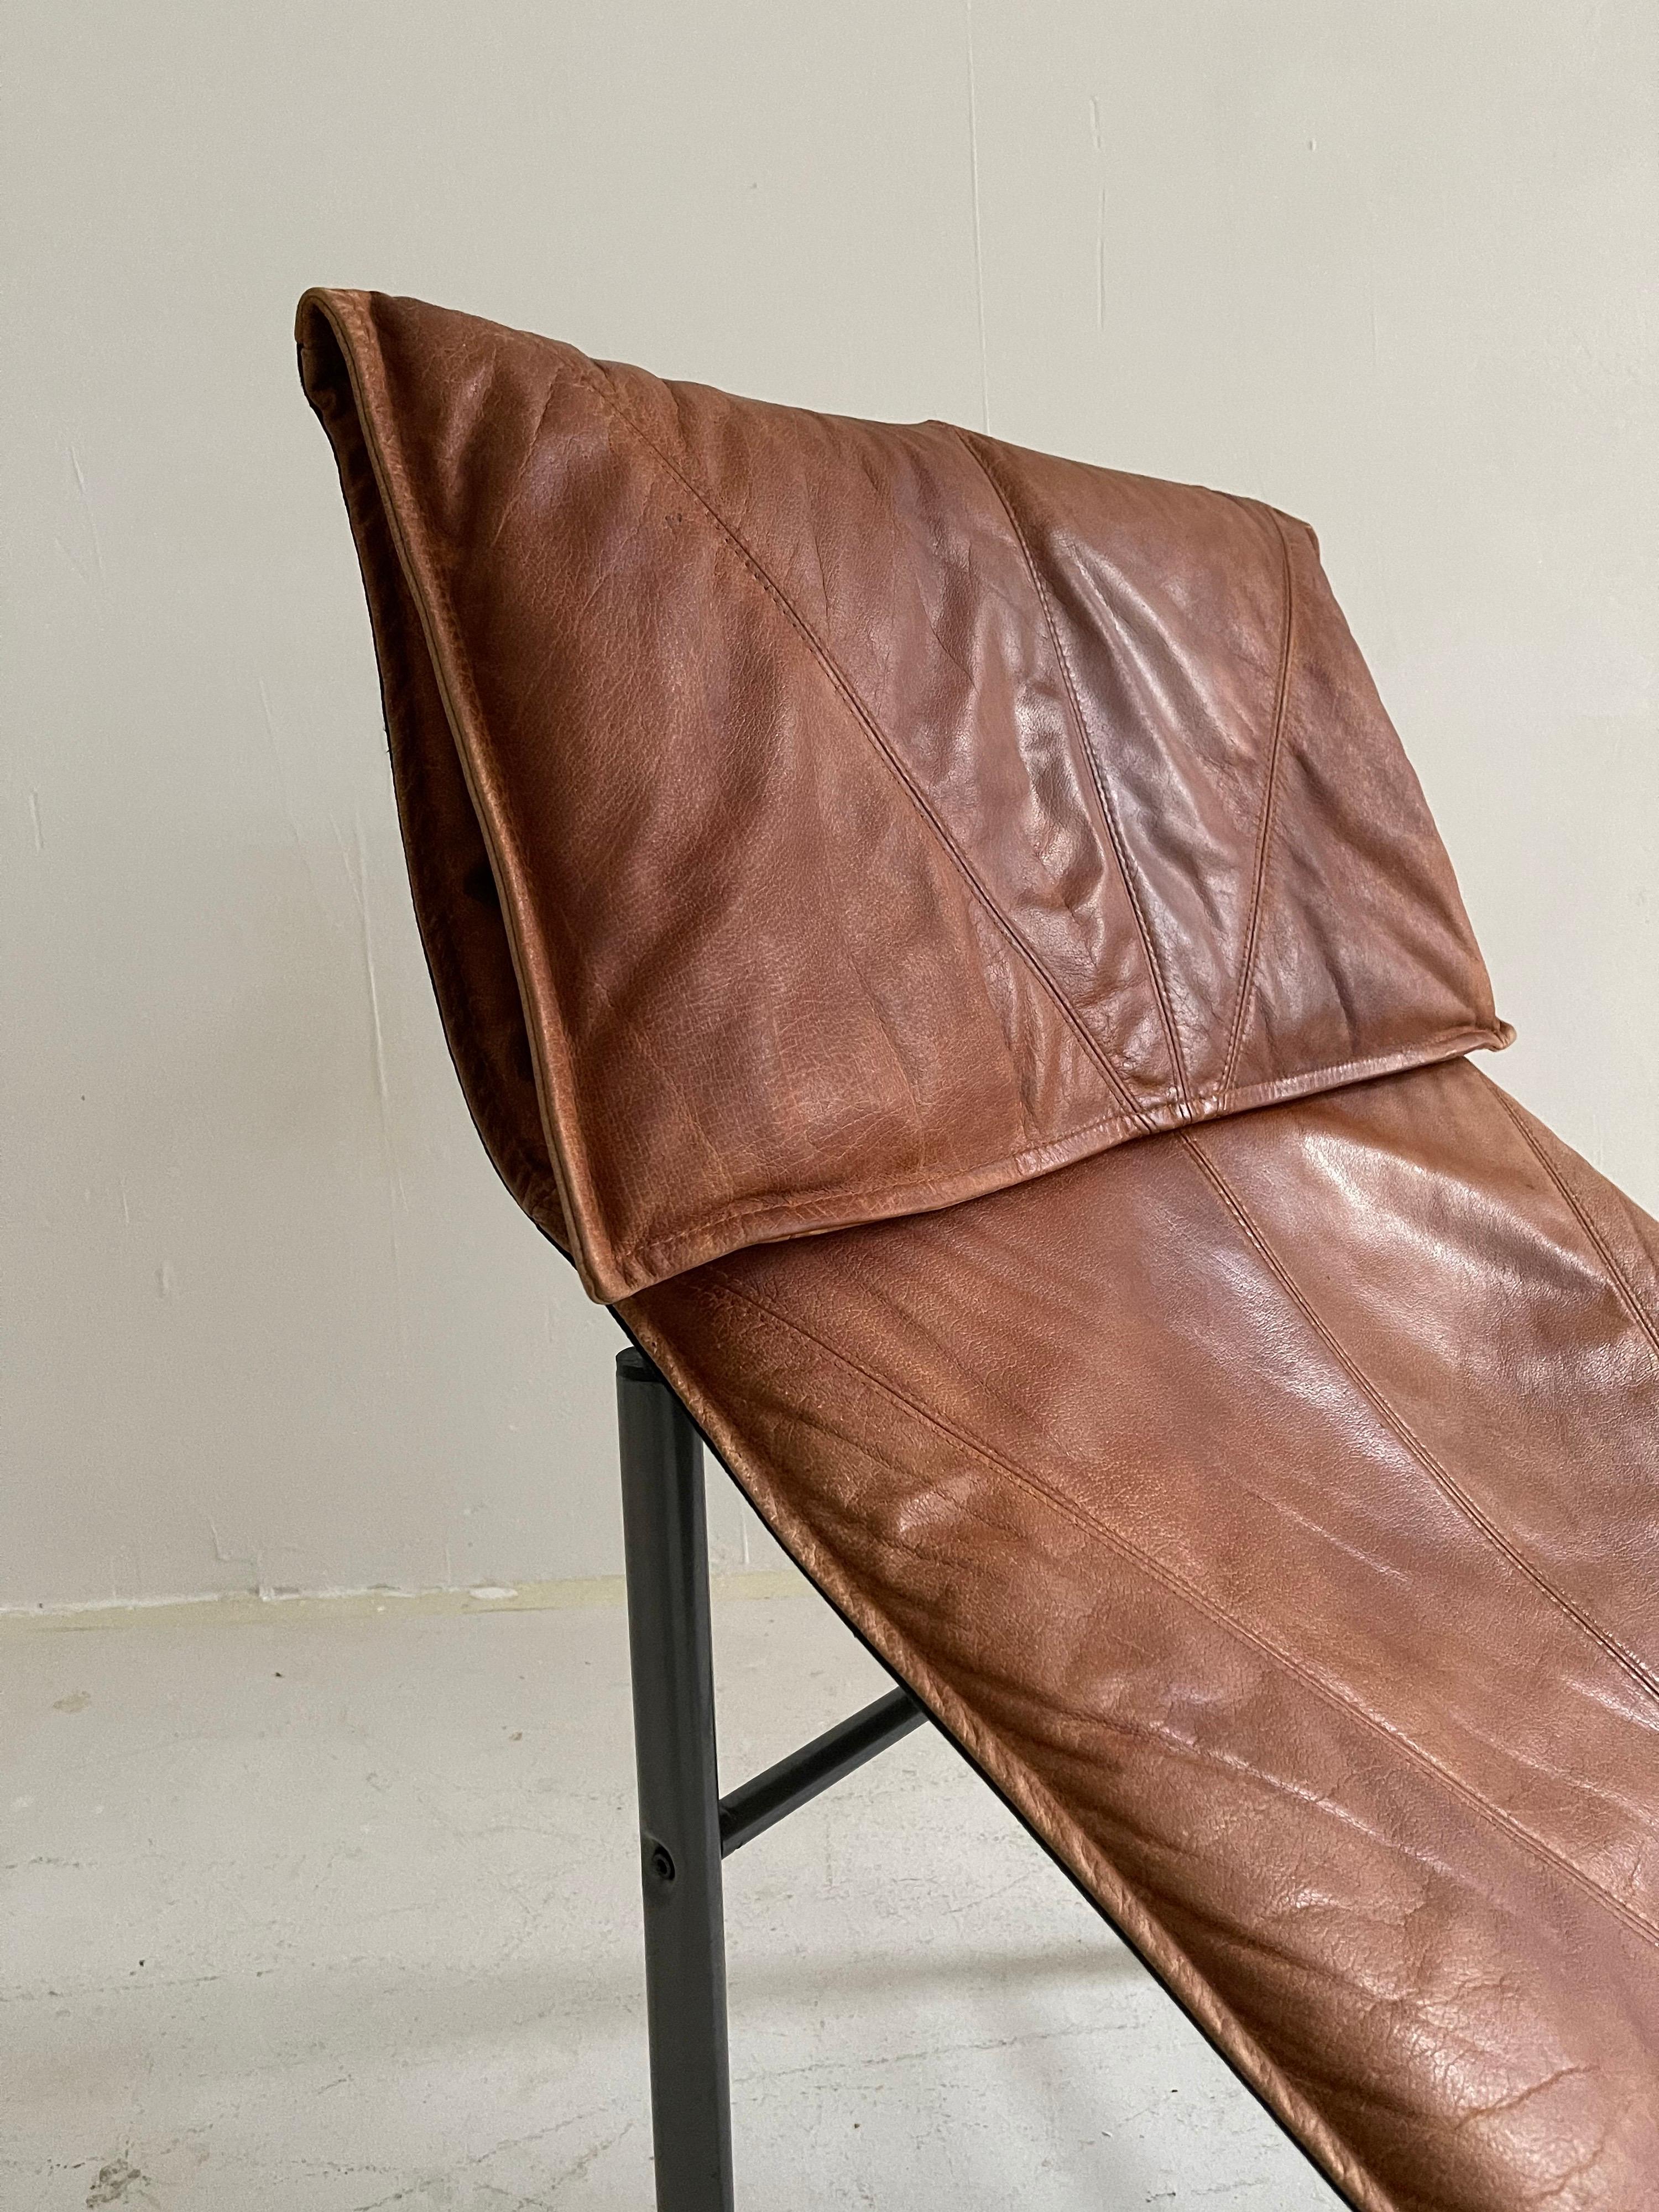 Patinated Cognac Leather Chaise Longue by Tord Bjorklund, Sweden, 1970 For Sale 4